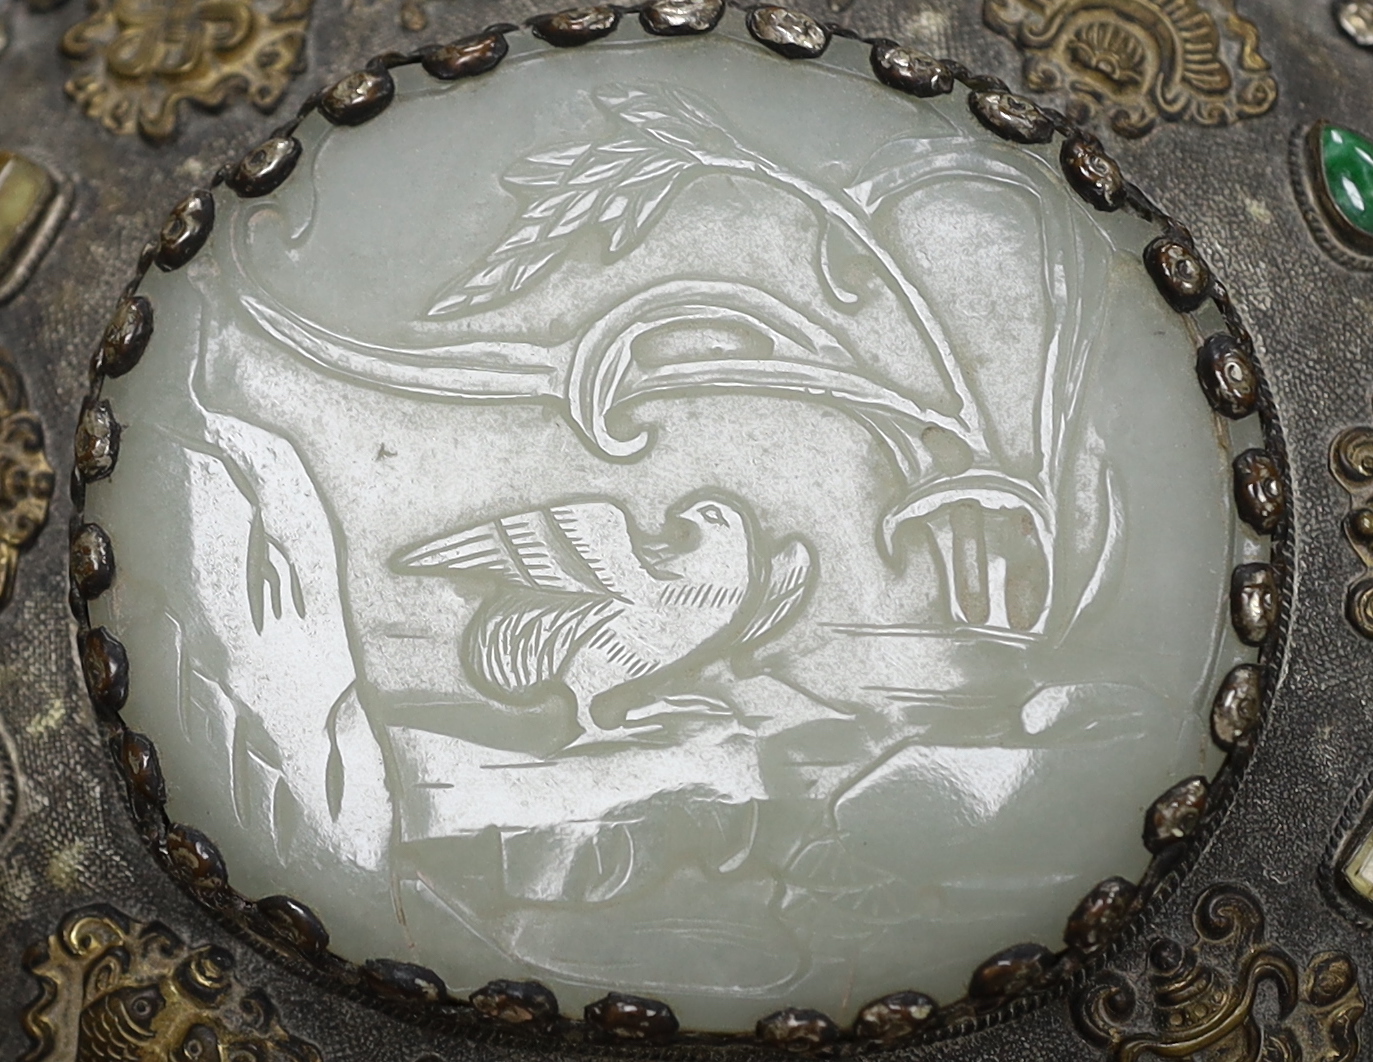 A Chinese celadon jade mounted hand mirror, the jade 18th/19th century